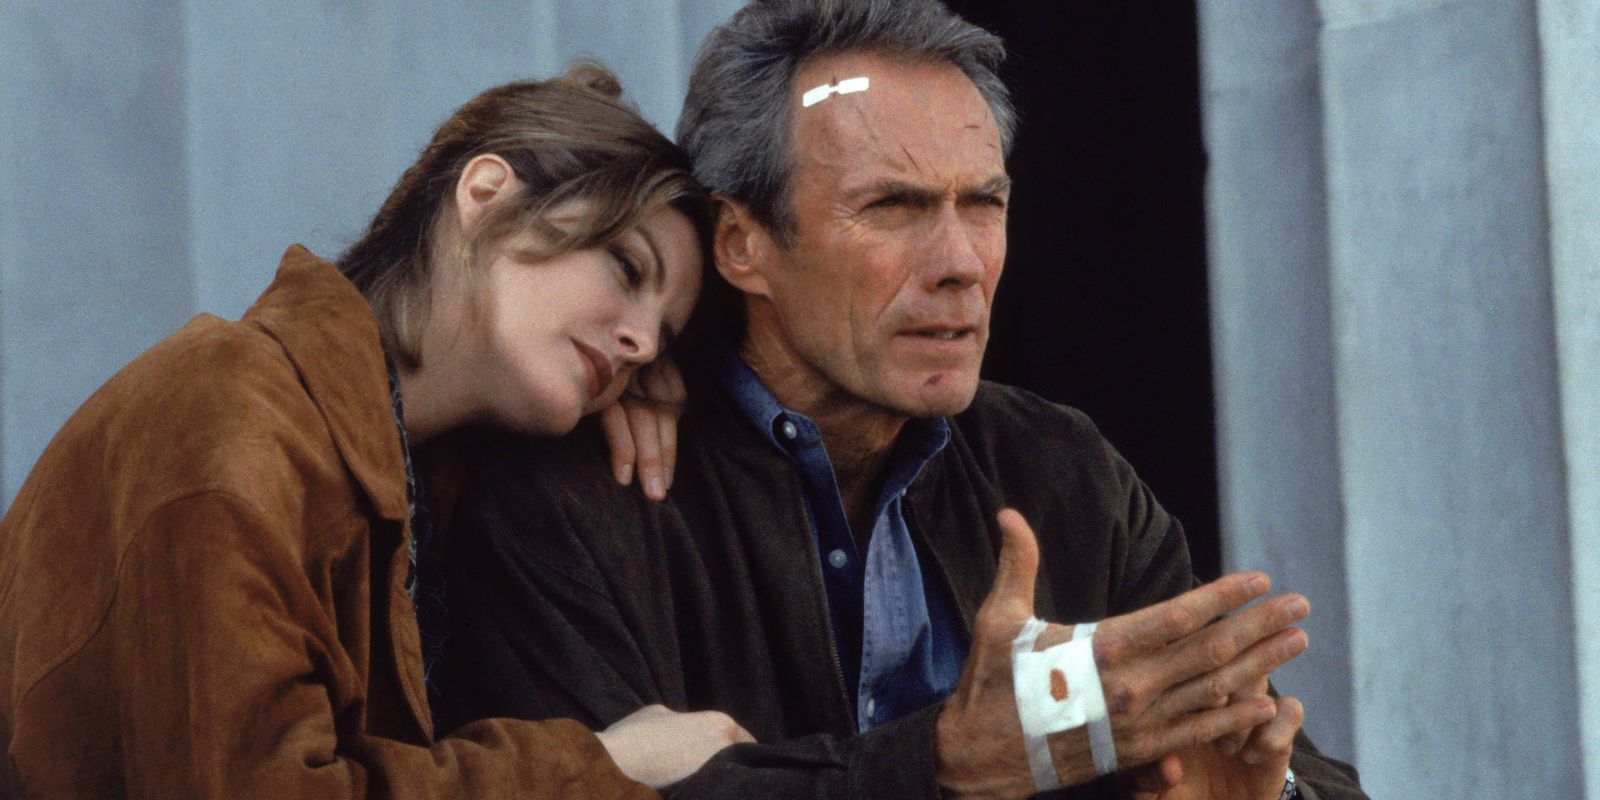 Lily resting her head on Frank's shoulder in In The Line Of Fire.